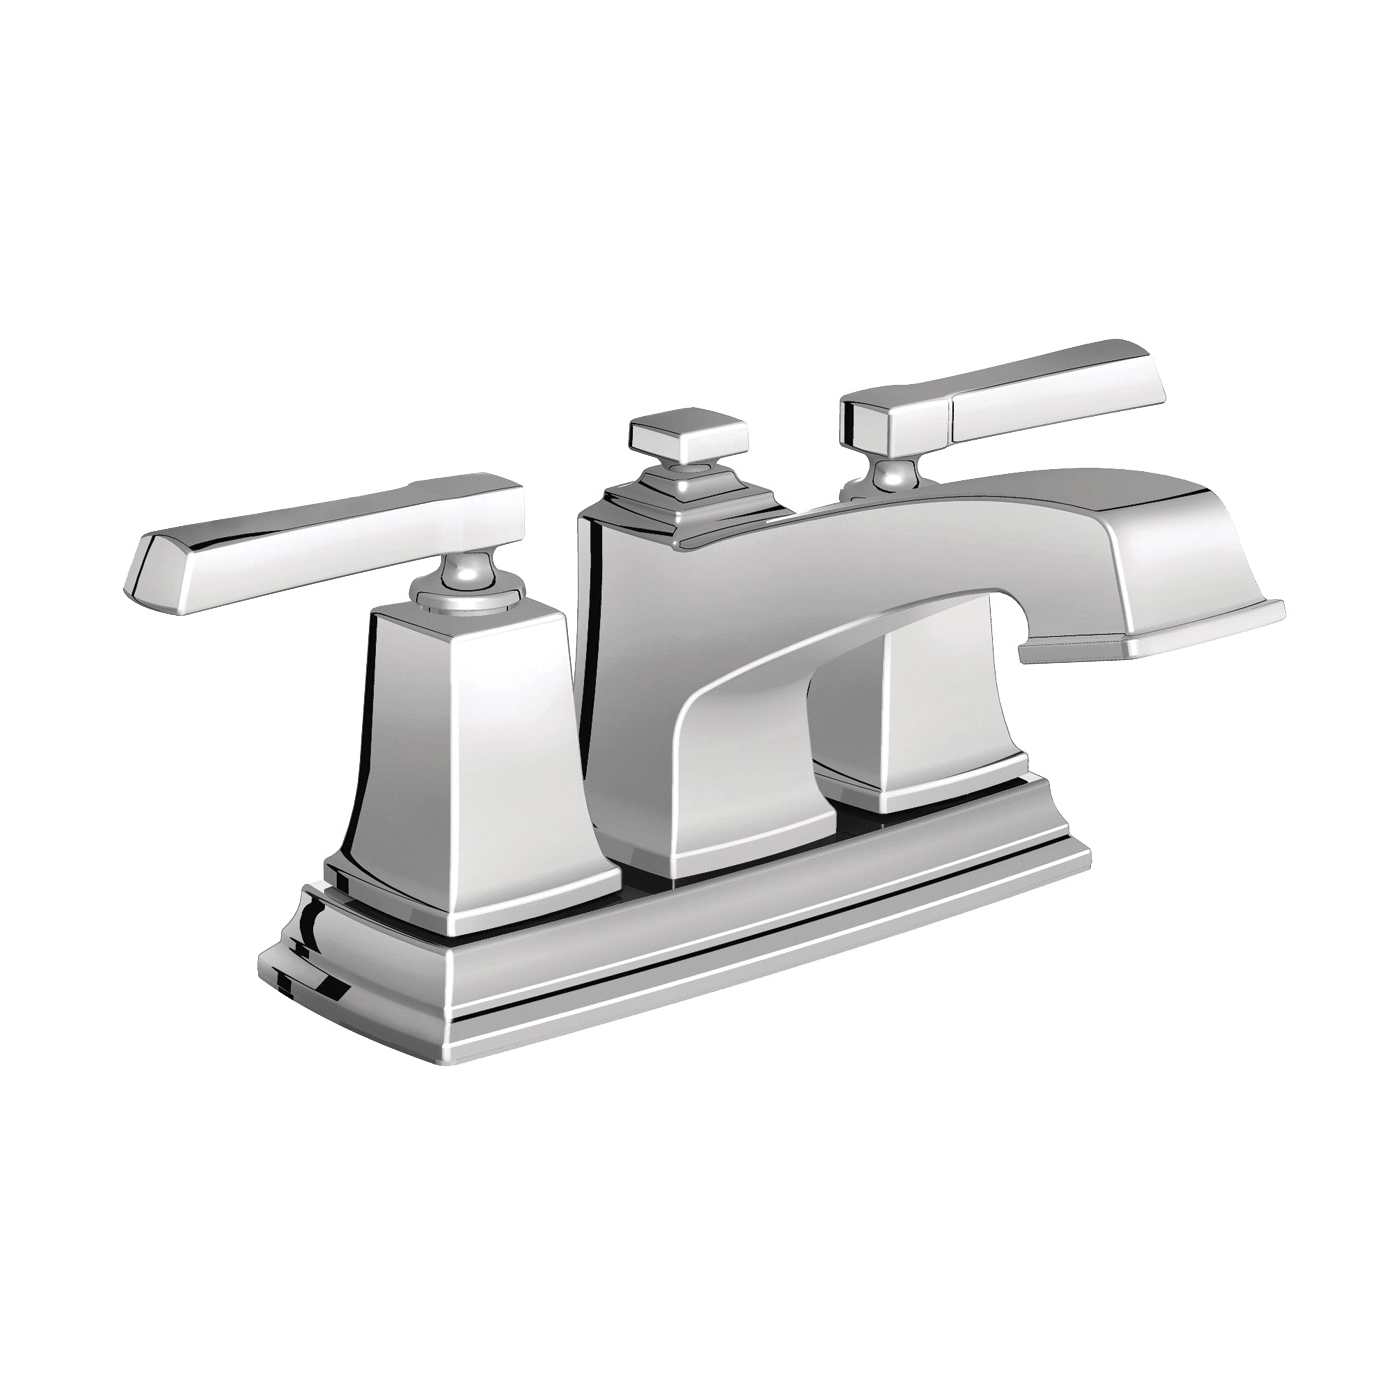 Boardwalk Series WS84800 Bathroom Faucet, 1.2 gpm, 2-Faucet Handle, Metal, Chrome Plated, Lever Handle